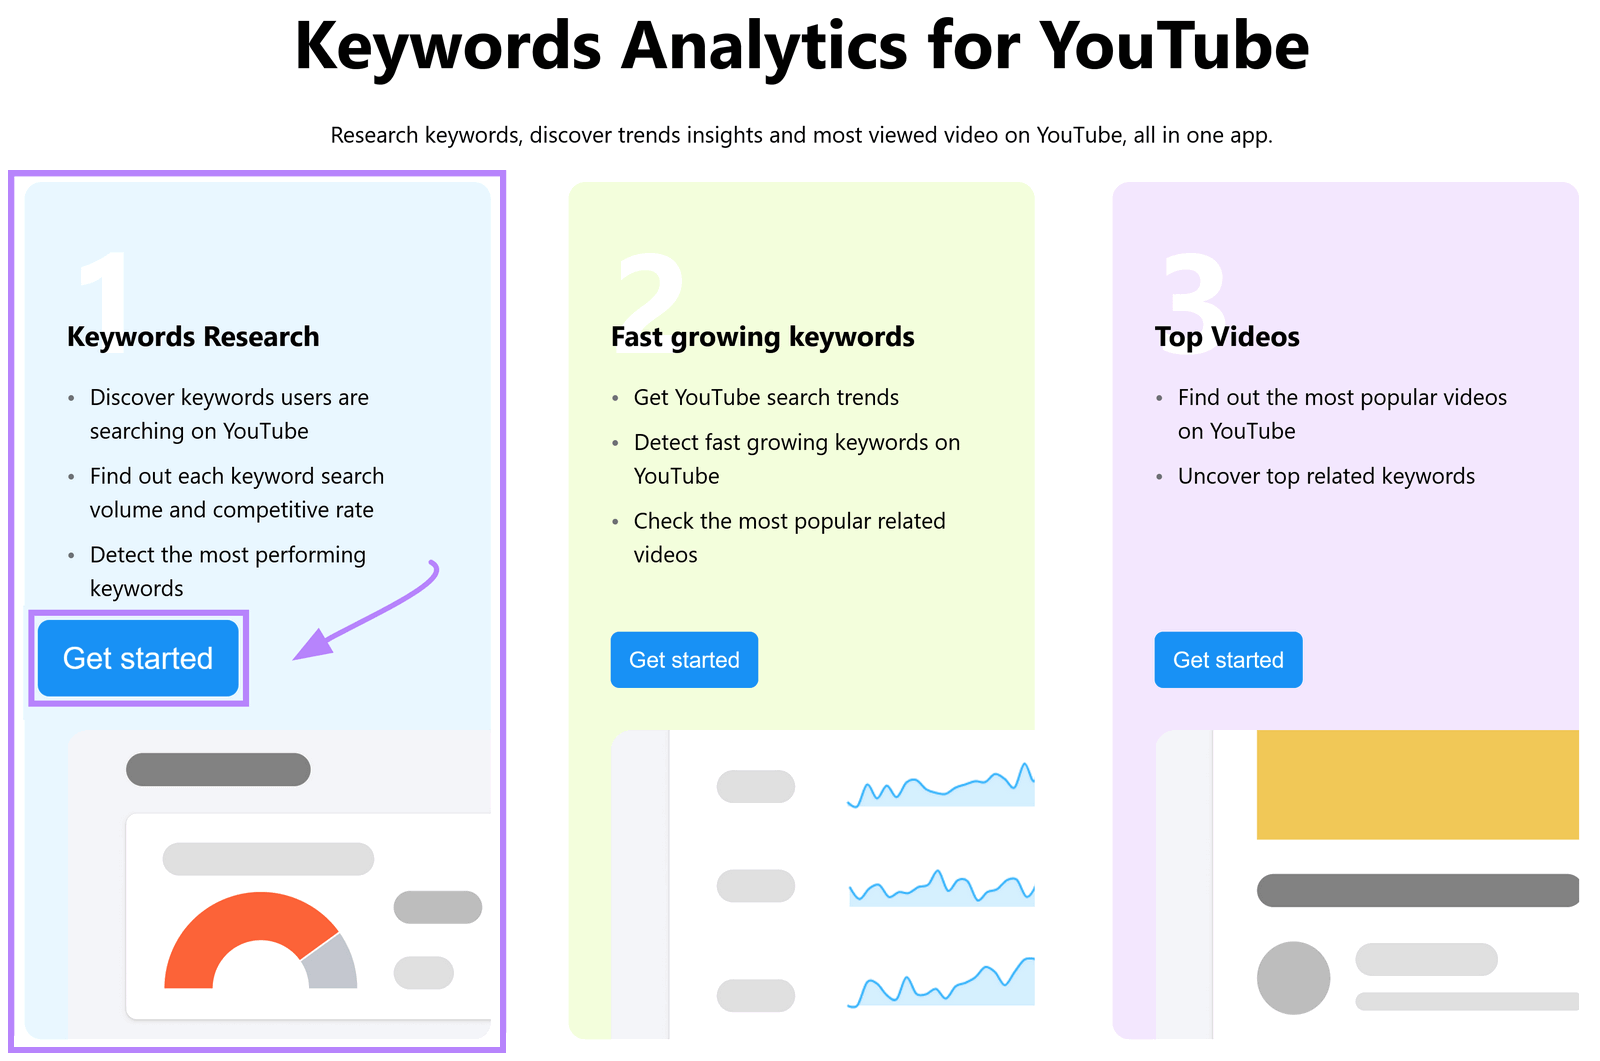 "Keyword Research" option selected under Keyword Analytics for YouTube